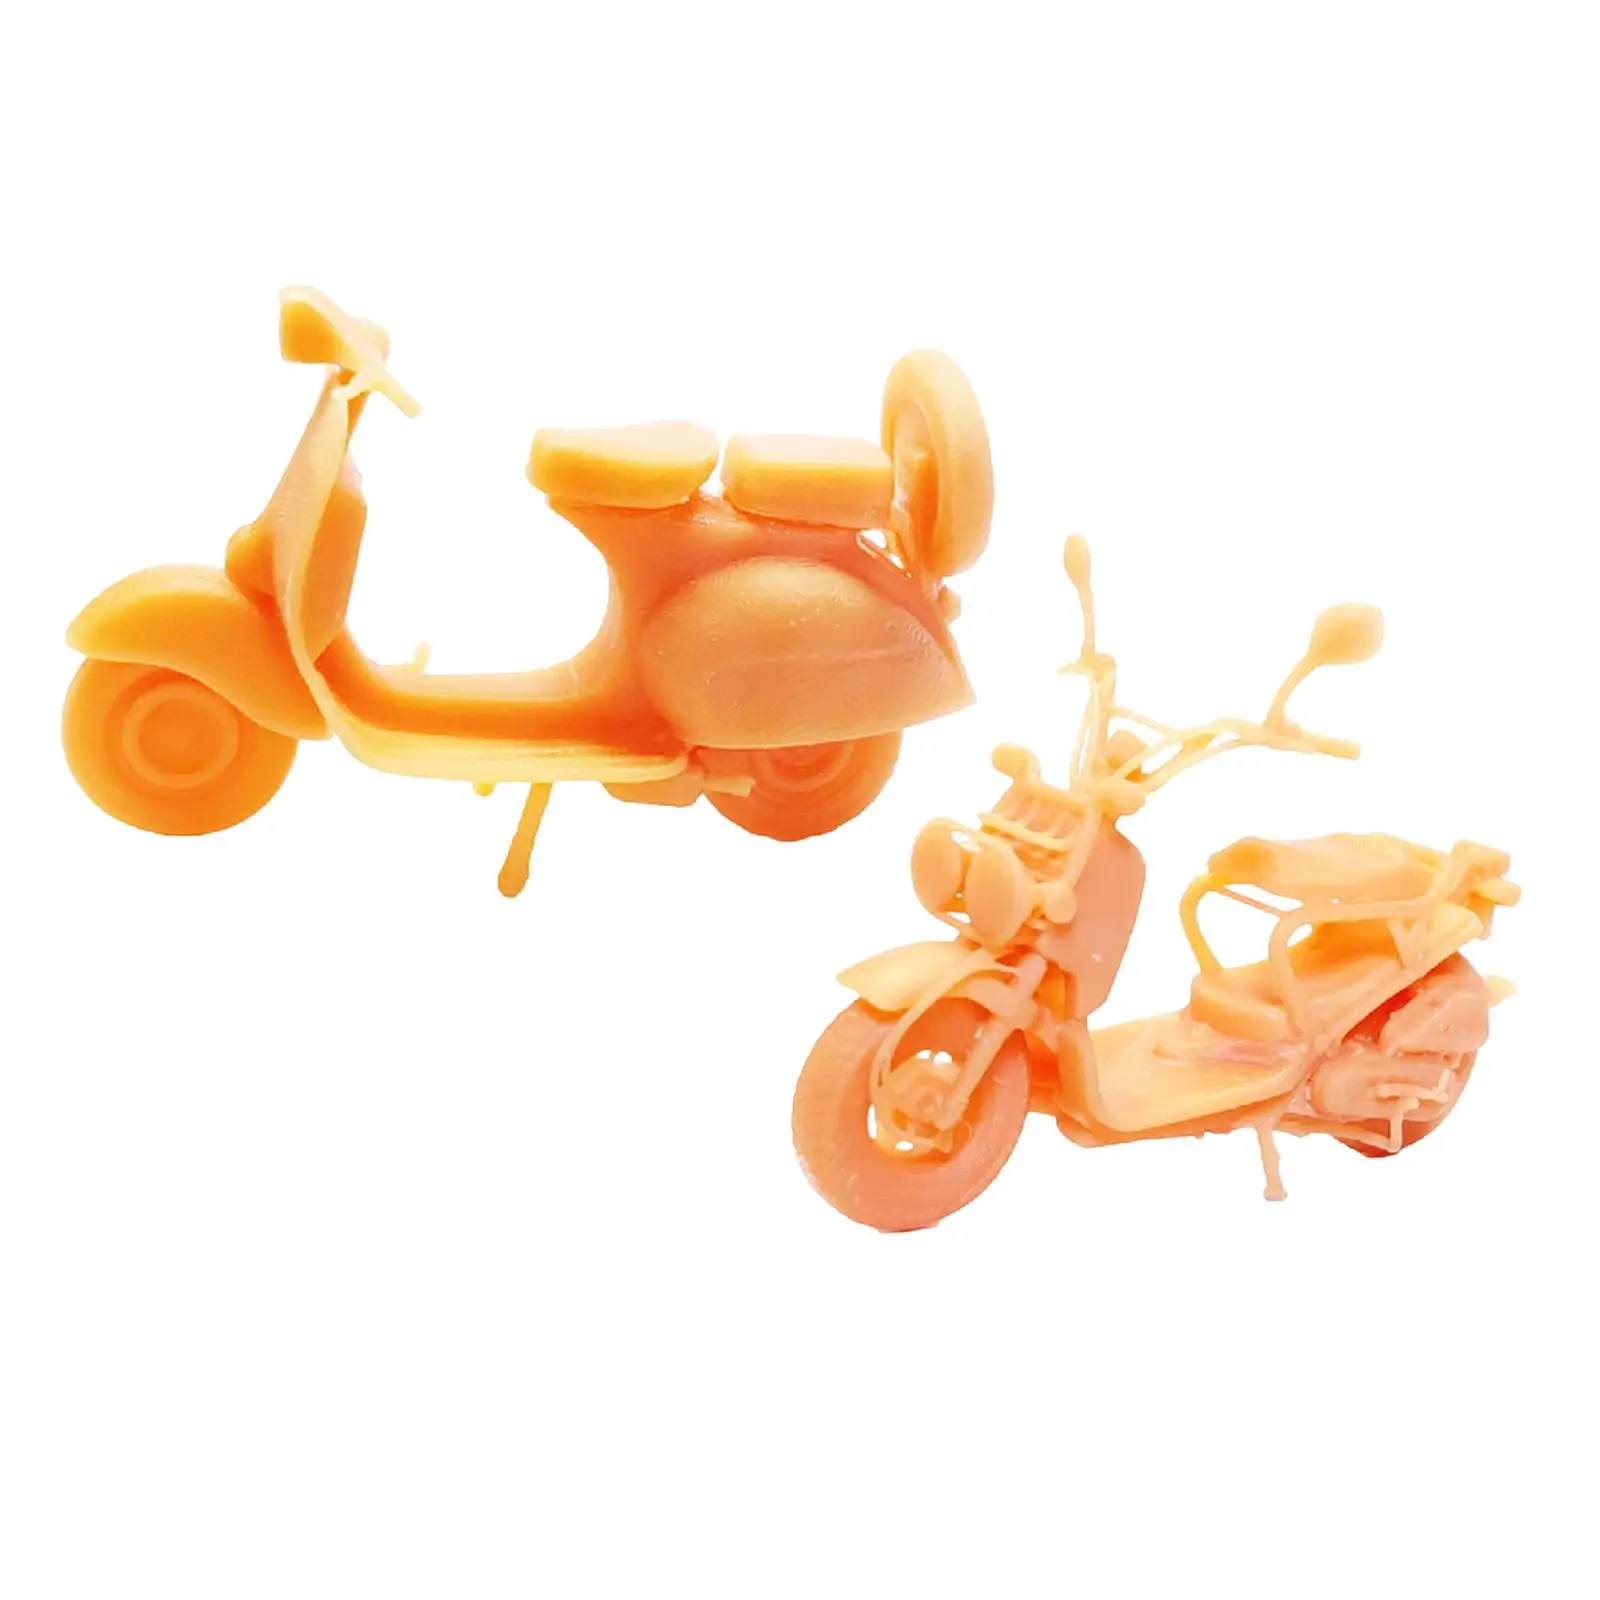 1/64 Miniature Motorcycle Model Collectibles Realistic Unpainted for Diorama Micro Landscapes Dollhouse Accessories Decor